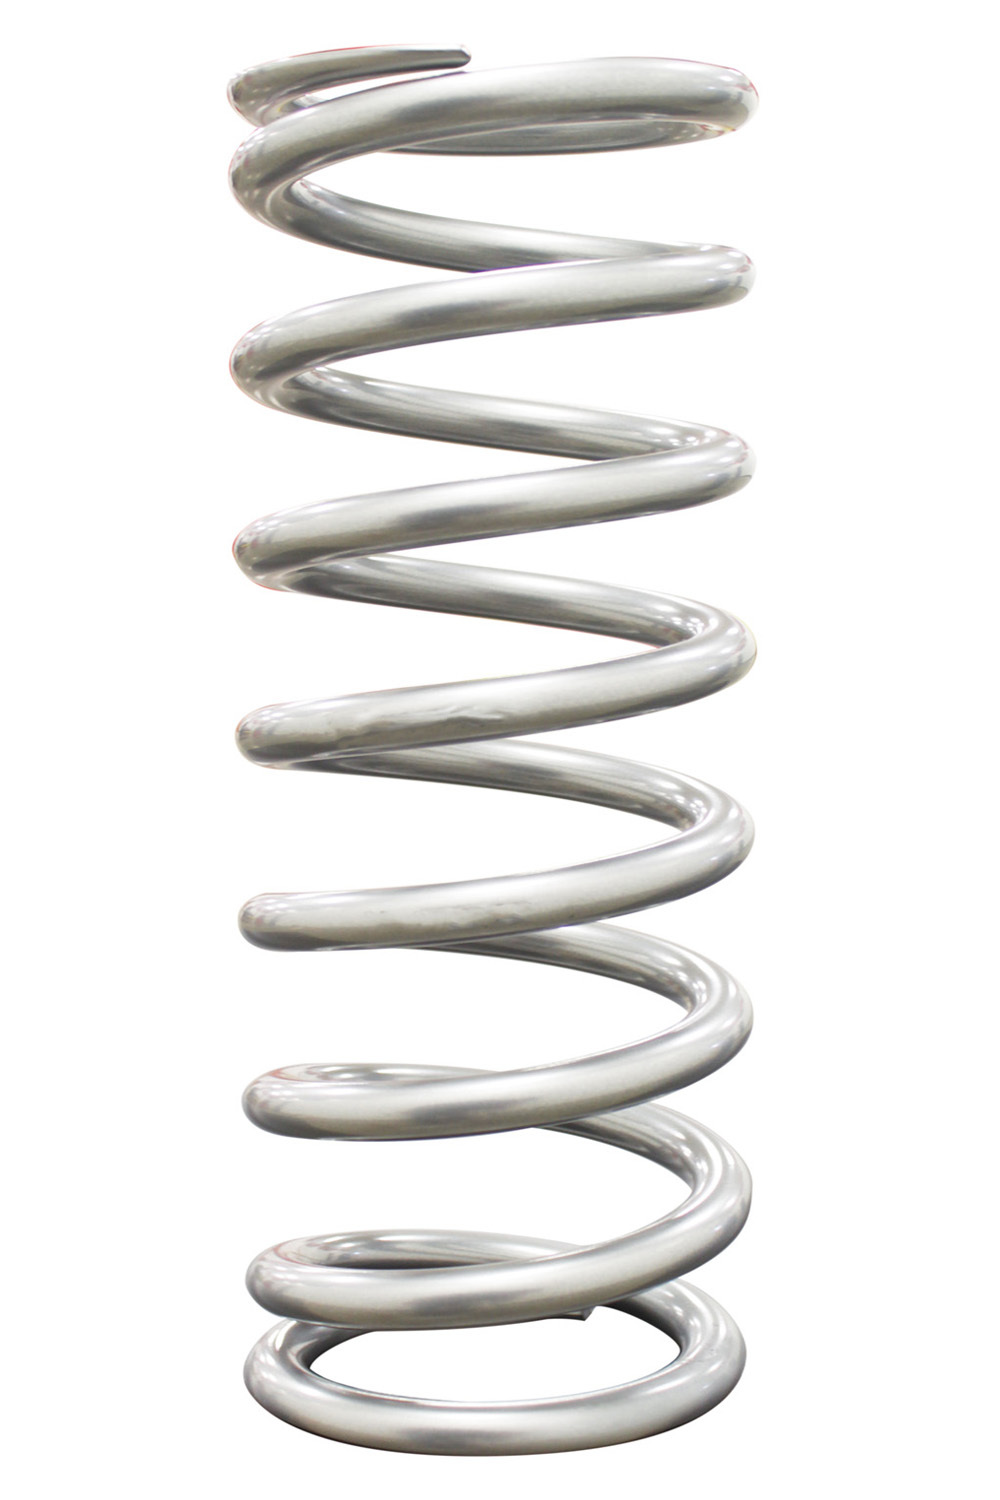 QA1 10HT100 Coil Spring, Coil-Over, 2.500 in ID, 10.000 in Length, 100 lb/in Spring Rate, Steel, Silver Powder Coat, Each